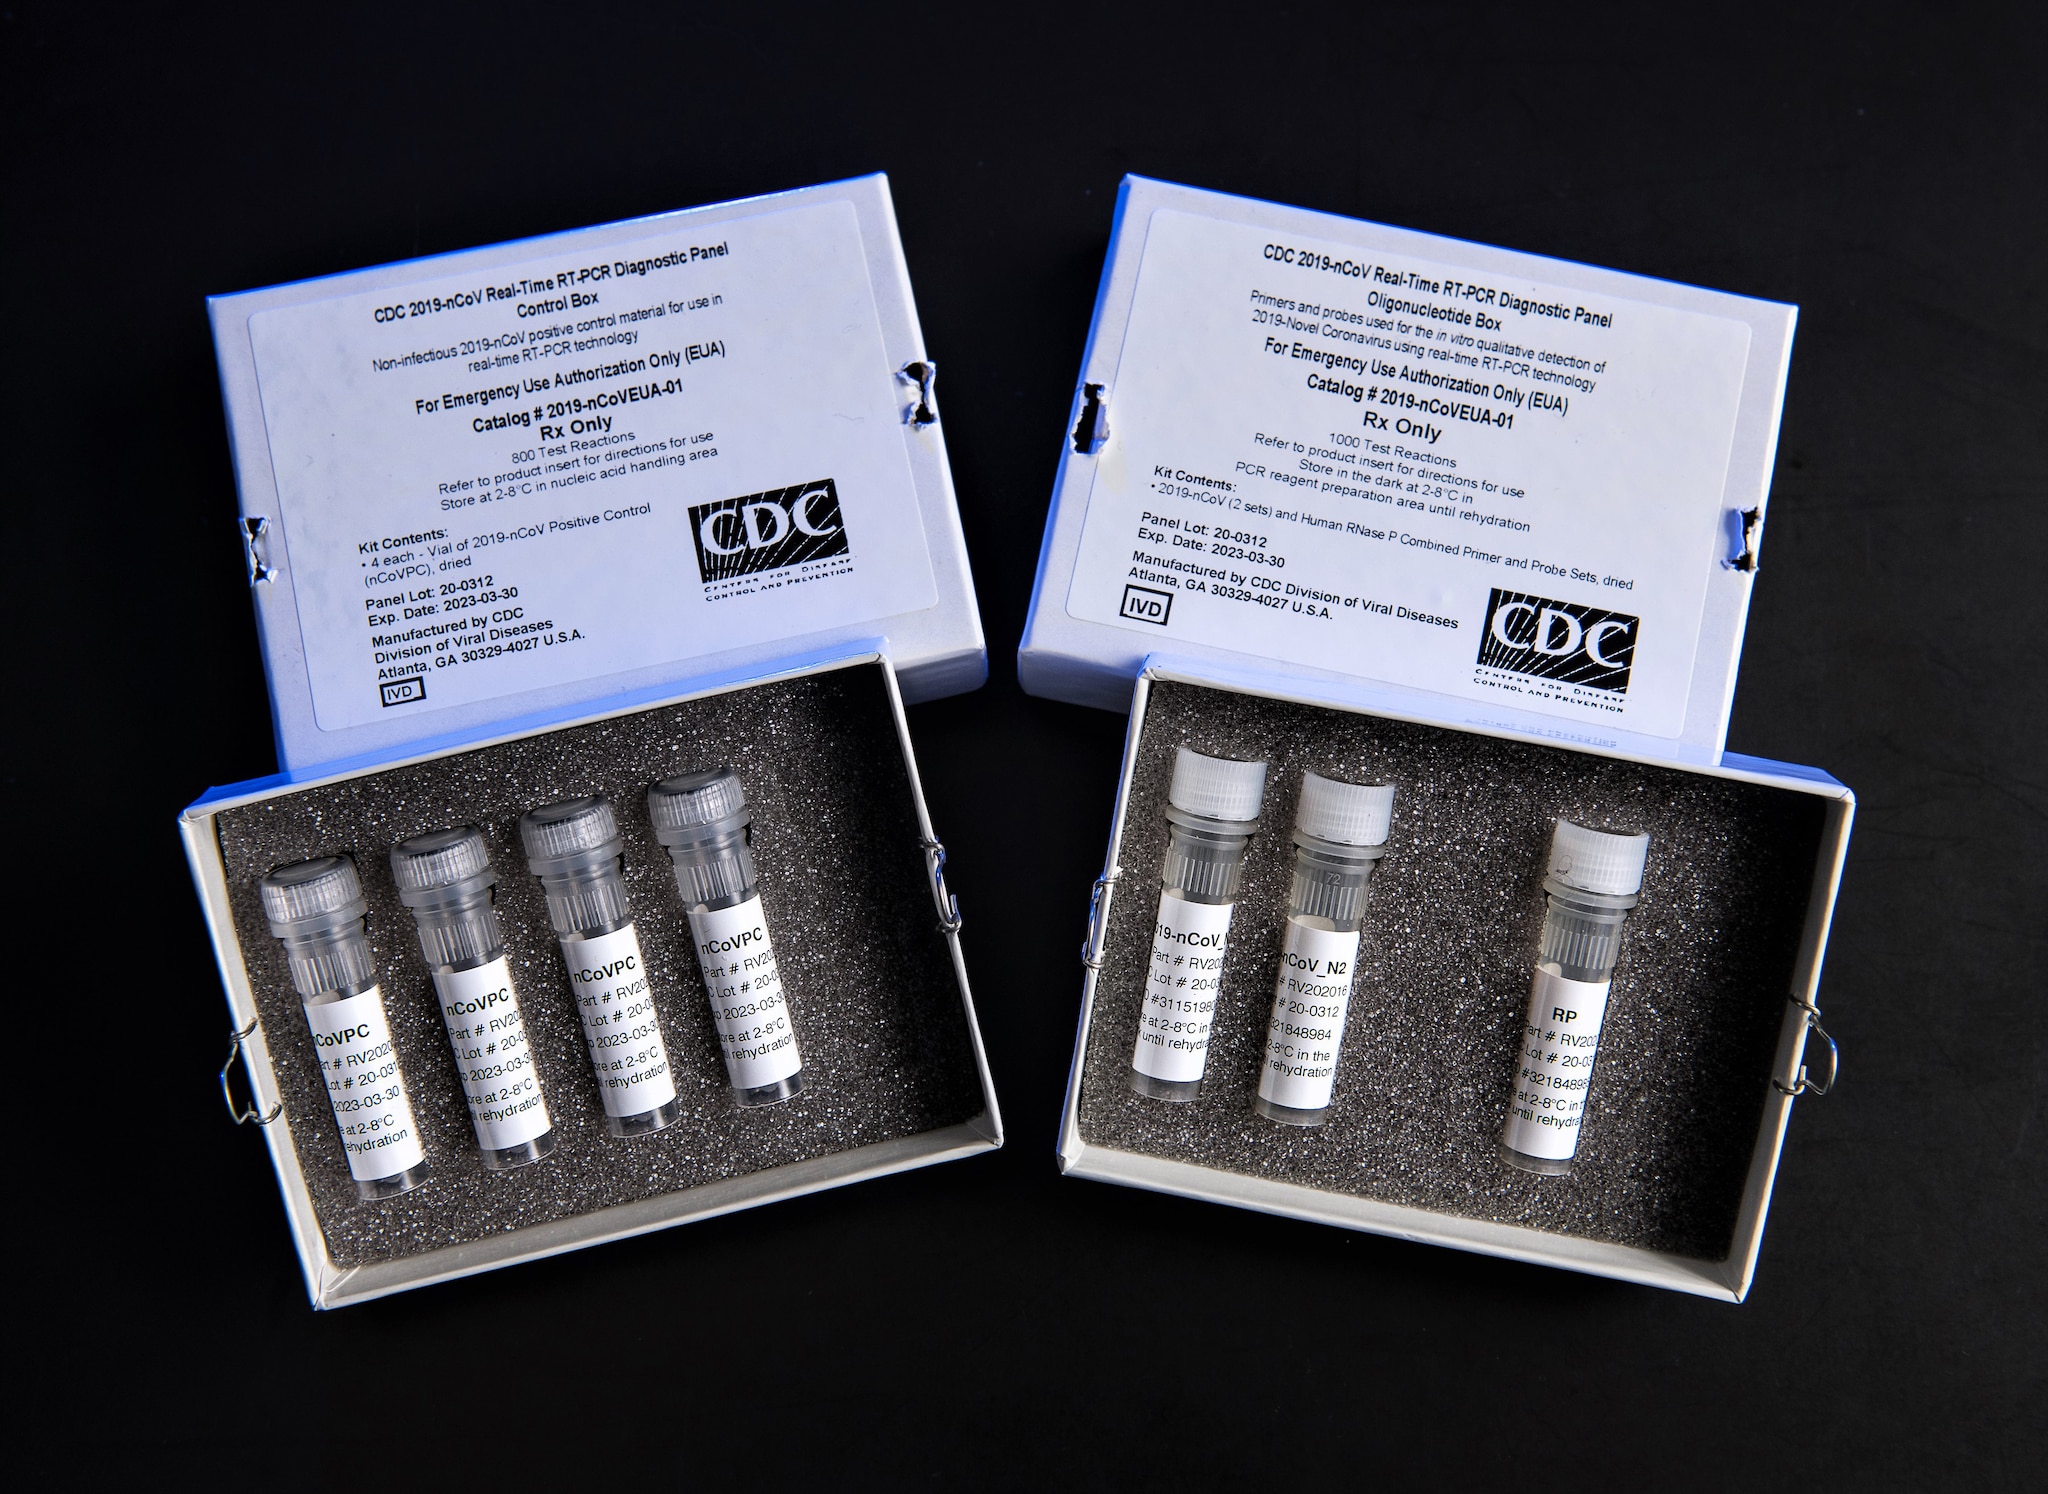 This is a picture of CDC’s laboratory test kit for the severe acute respiratory syndrome coronavirus 2 (SARS-CoV-2). CDC is shipping the test kits to laboratories CDC has designated as qualified, including U.S. state and local public health laboratories, Department of Defense (DOD) laboratories and select international laboratories. The test kits are bolstering global laboratory capacity for detecting SARS-CoV-2.